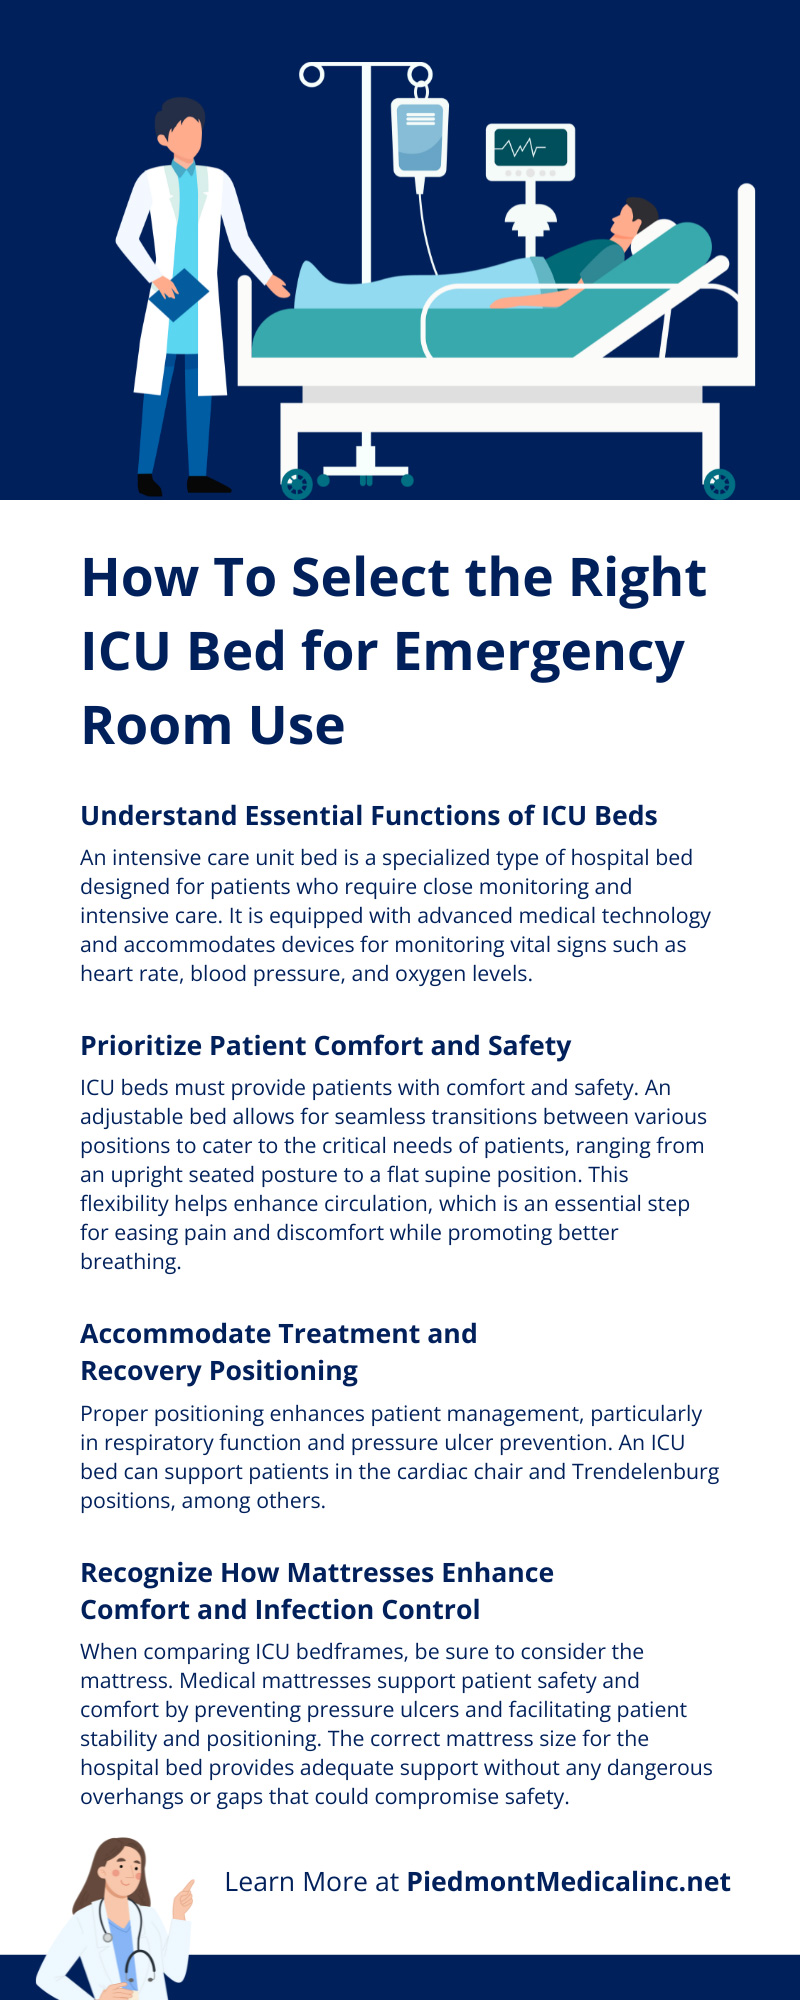 How To Select the Right ICU Bed for Emergency Room Use
